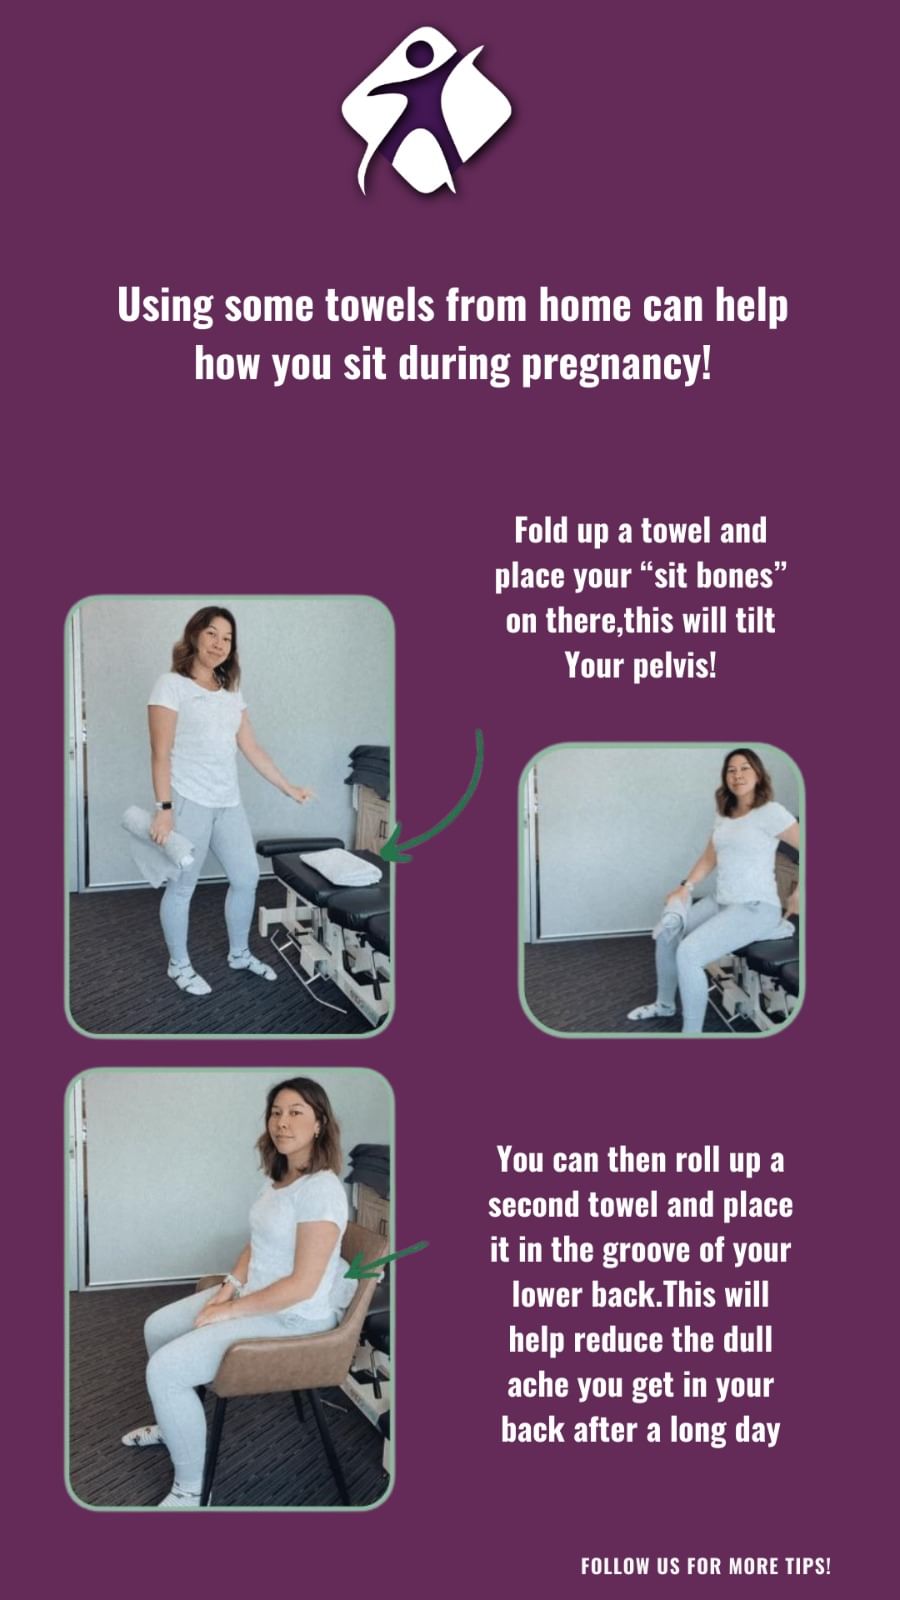 Using some towels from home can help how you sit during pregnancy